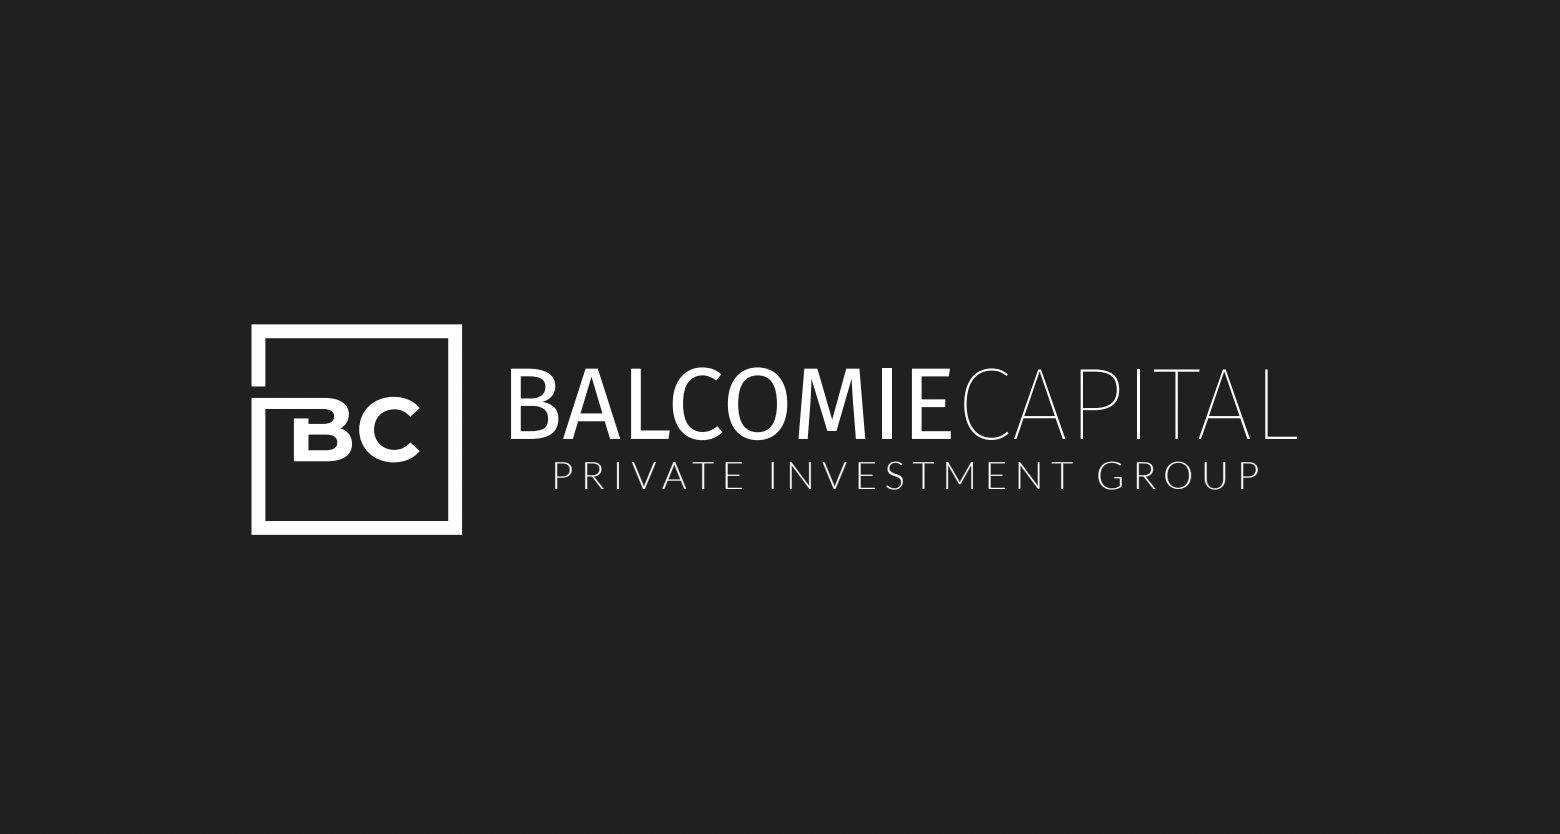 Balcomie Capital Announces Launch of Self-Storage Investment Fund